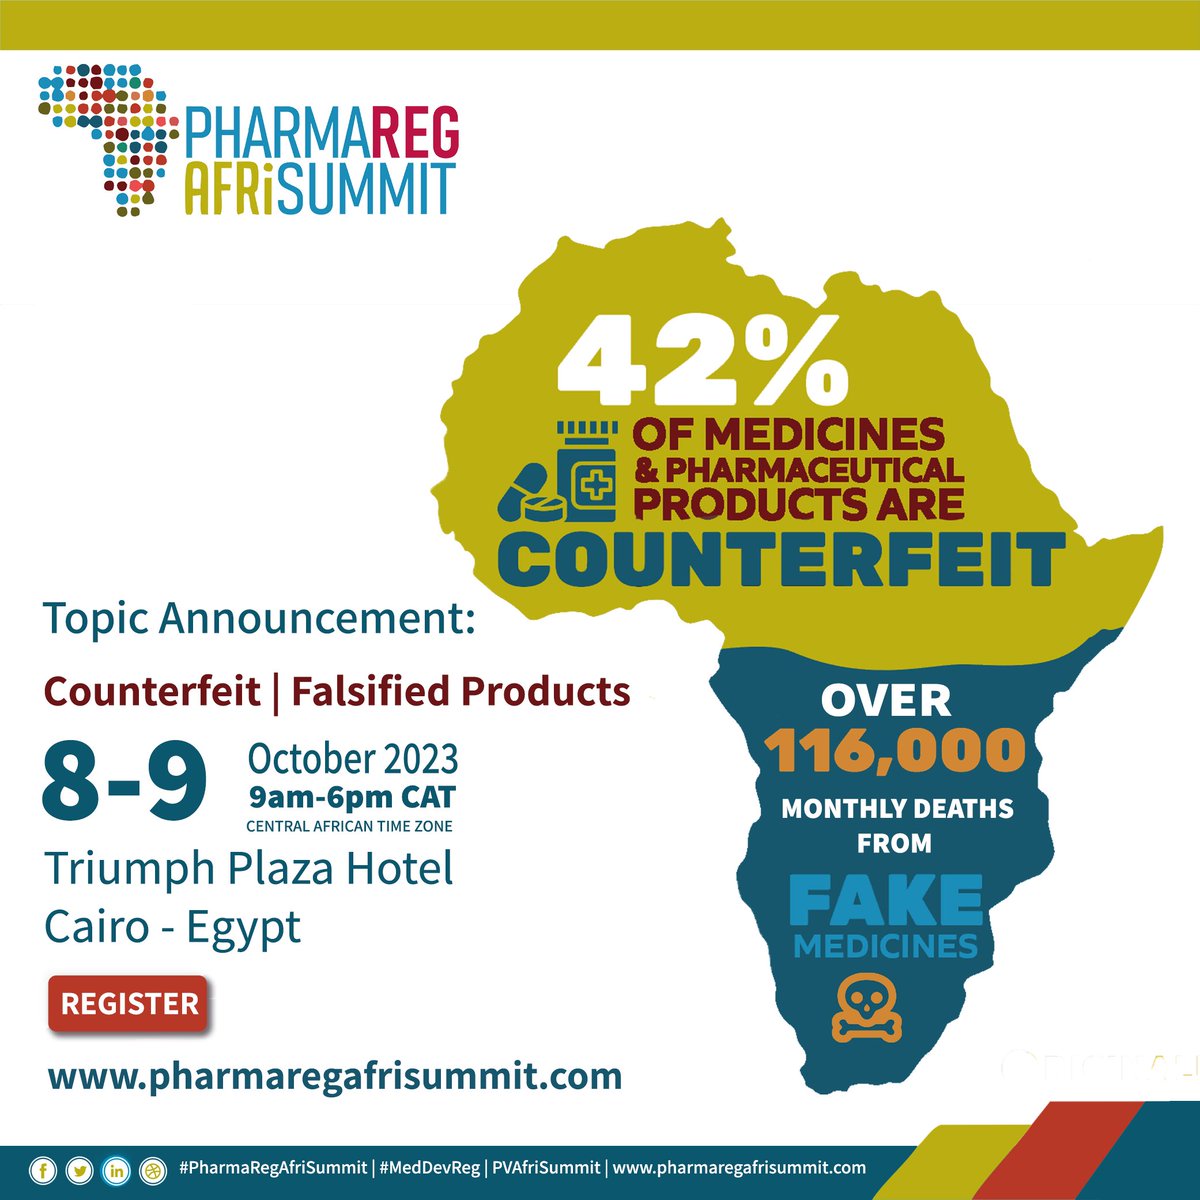 Join #PharmaRegAfriSummit 2023 for a vital #session on #Counterfeit/#Falsified Products in #Cairo #Egypt:

🗓️ Date: Oct 8-9, 2023 
🏨 Venue: Triumph Plaza Hotel

Identifying counterfeit medicines.

Register: pharmaregafrisummit.com
#HealthcareSafety #AfriSummit #pharmaceutical